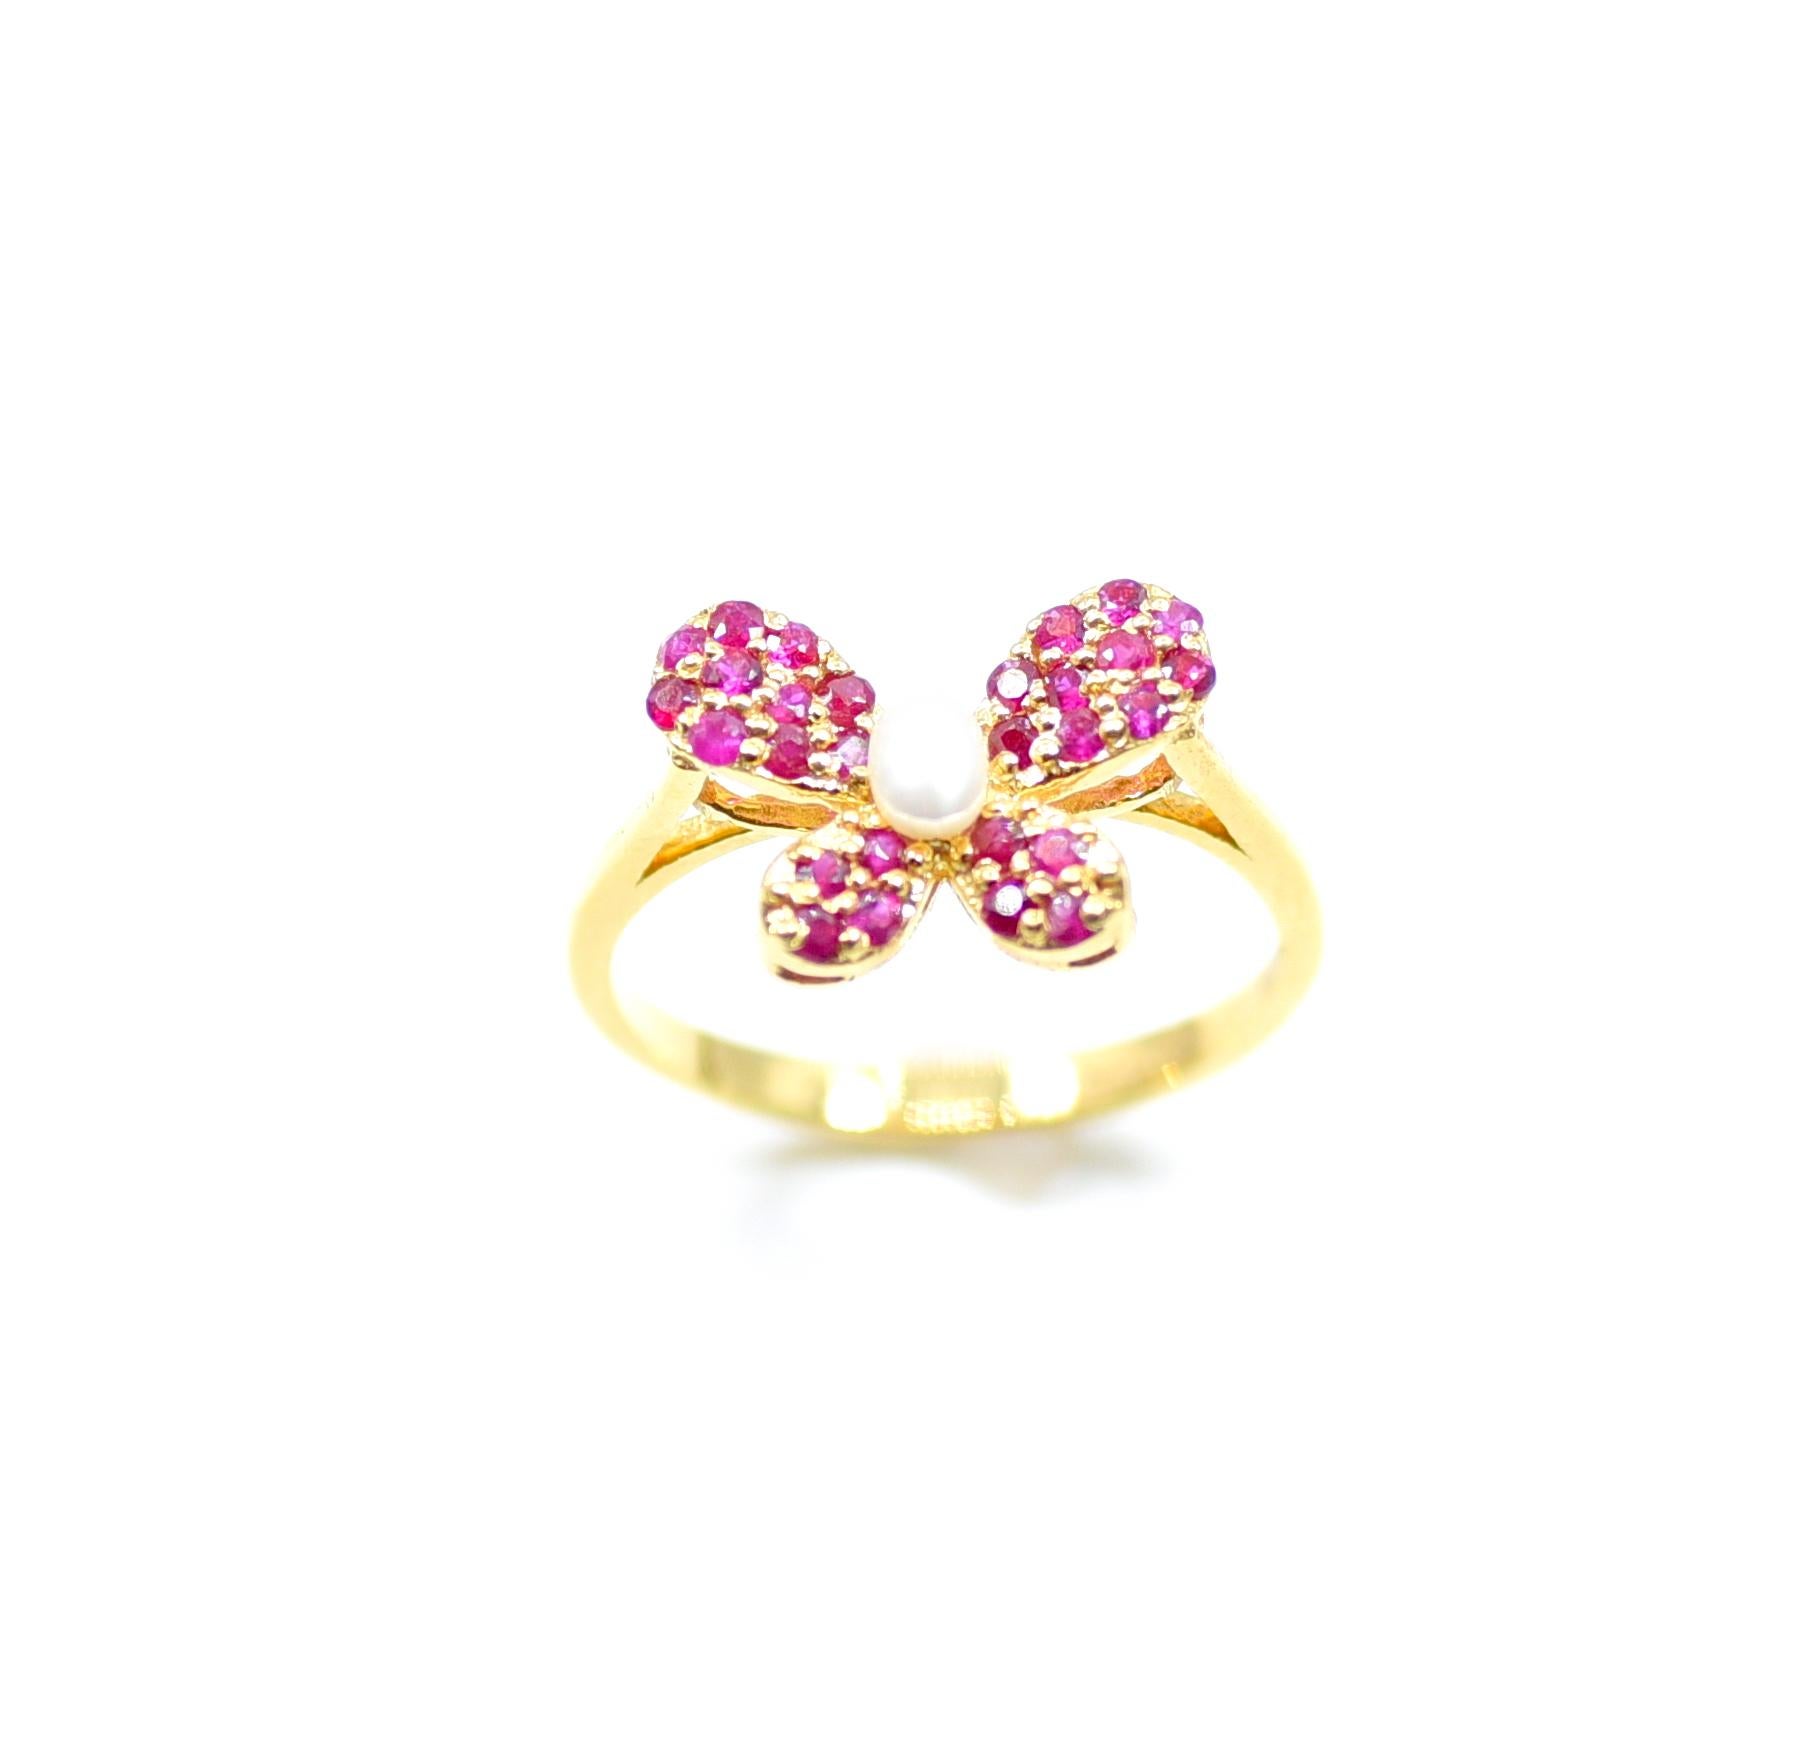 This Vintage like Pearl ruby Butterfly Ring is a timeless design that will surely add glamour to a classy look.
Most of our jewels are made to order, so please allow us for a 2-4 week delivery.
Please note the possibility of natural inclusions in